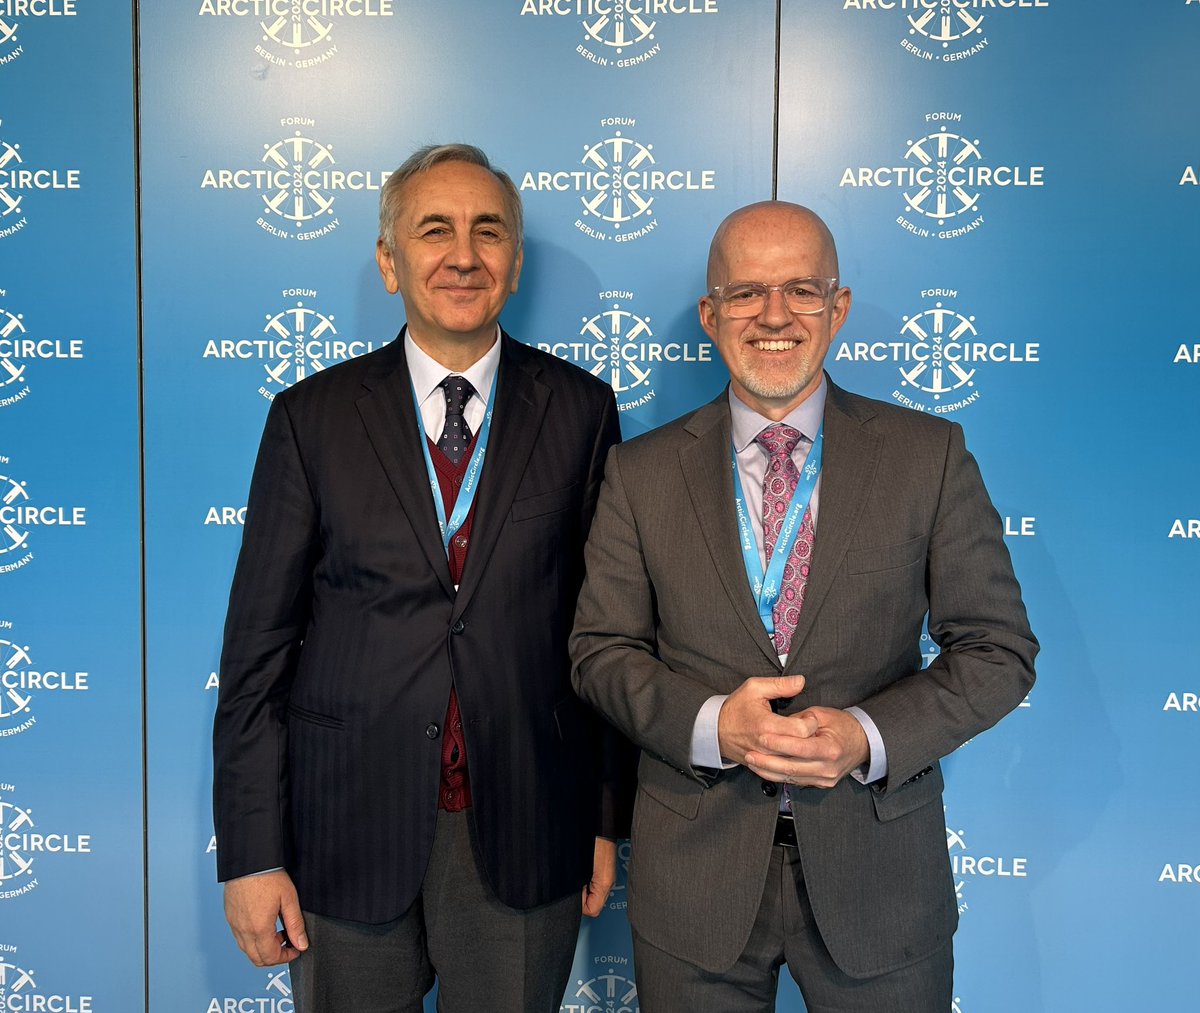 There are no risks that might endanger solid 🇮🇹 & 🇵🇱 cooperation on #Arctic matters. It’s always a pleasure to meet my good friend @crobustelli63 in various parts of the globe. This time during @_Arctic_Circle #Berlin forum